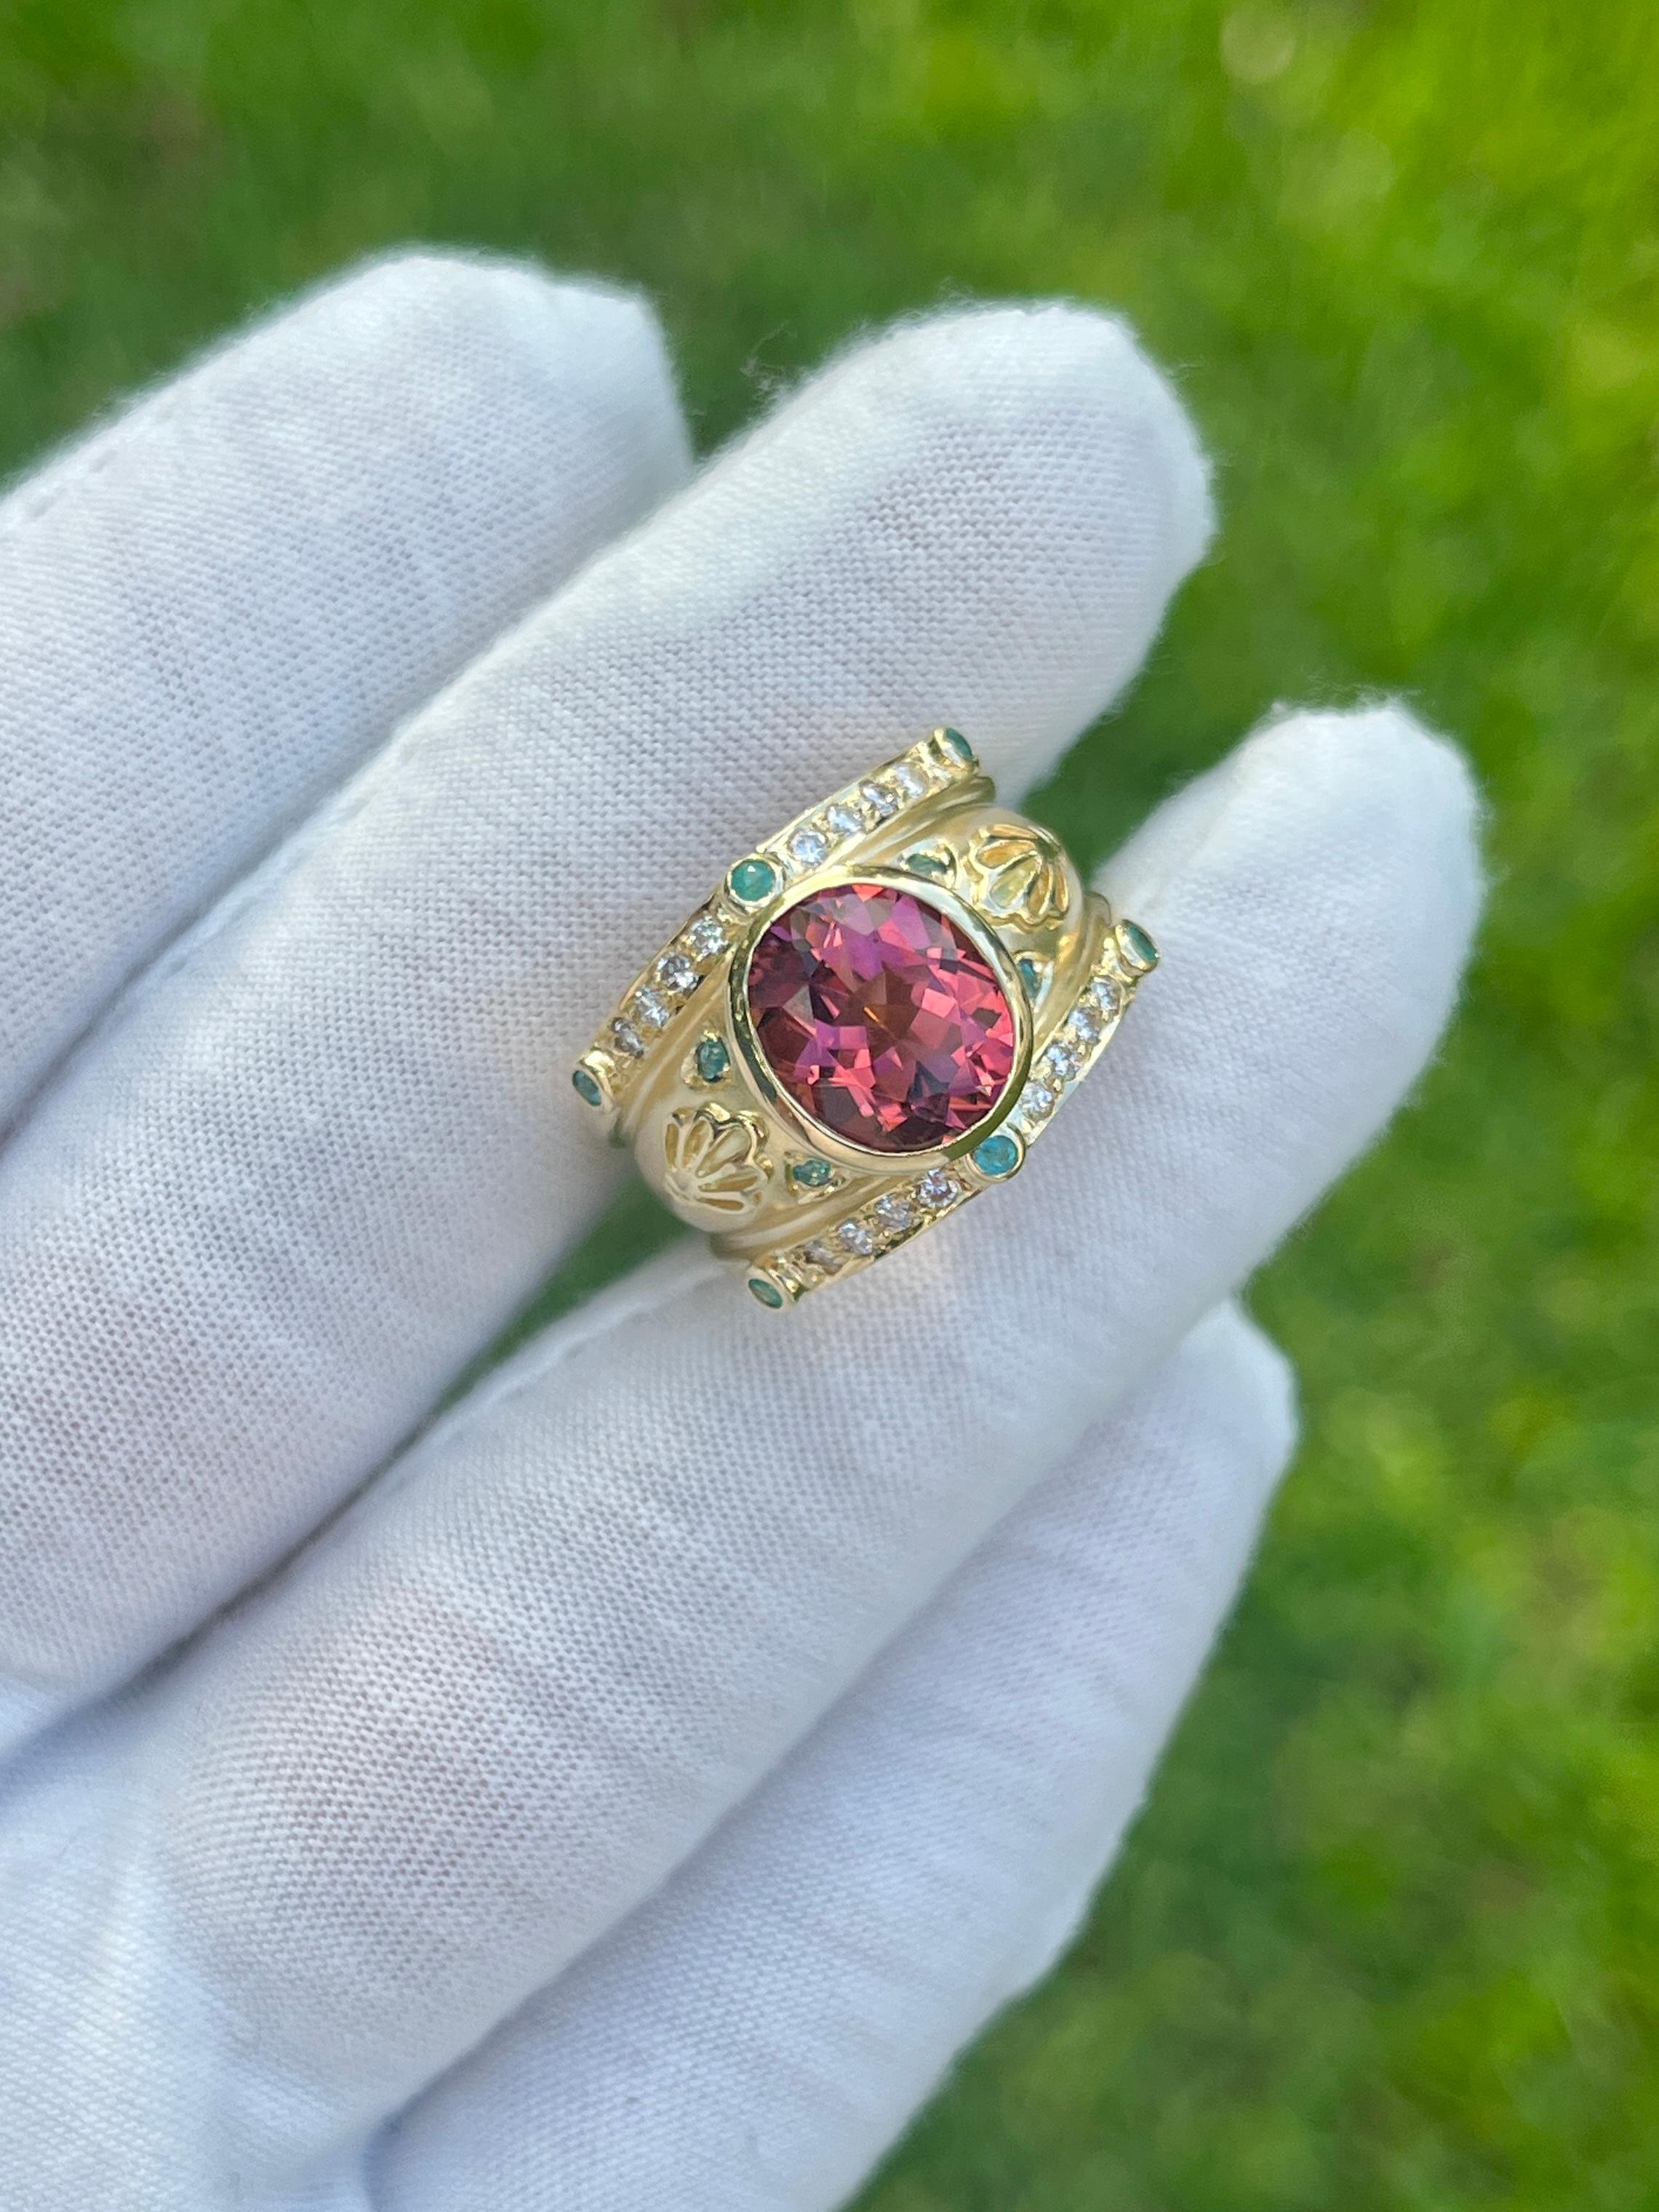 Oval Cut 6 Carat TW Pinkish Red Tourmaline with Neon Paraiba Tourmaline Ring For Sale